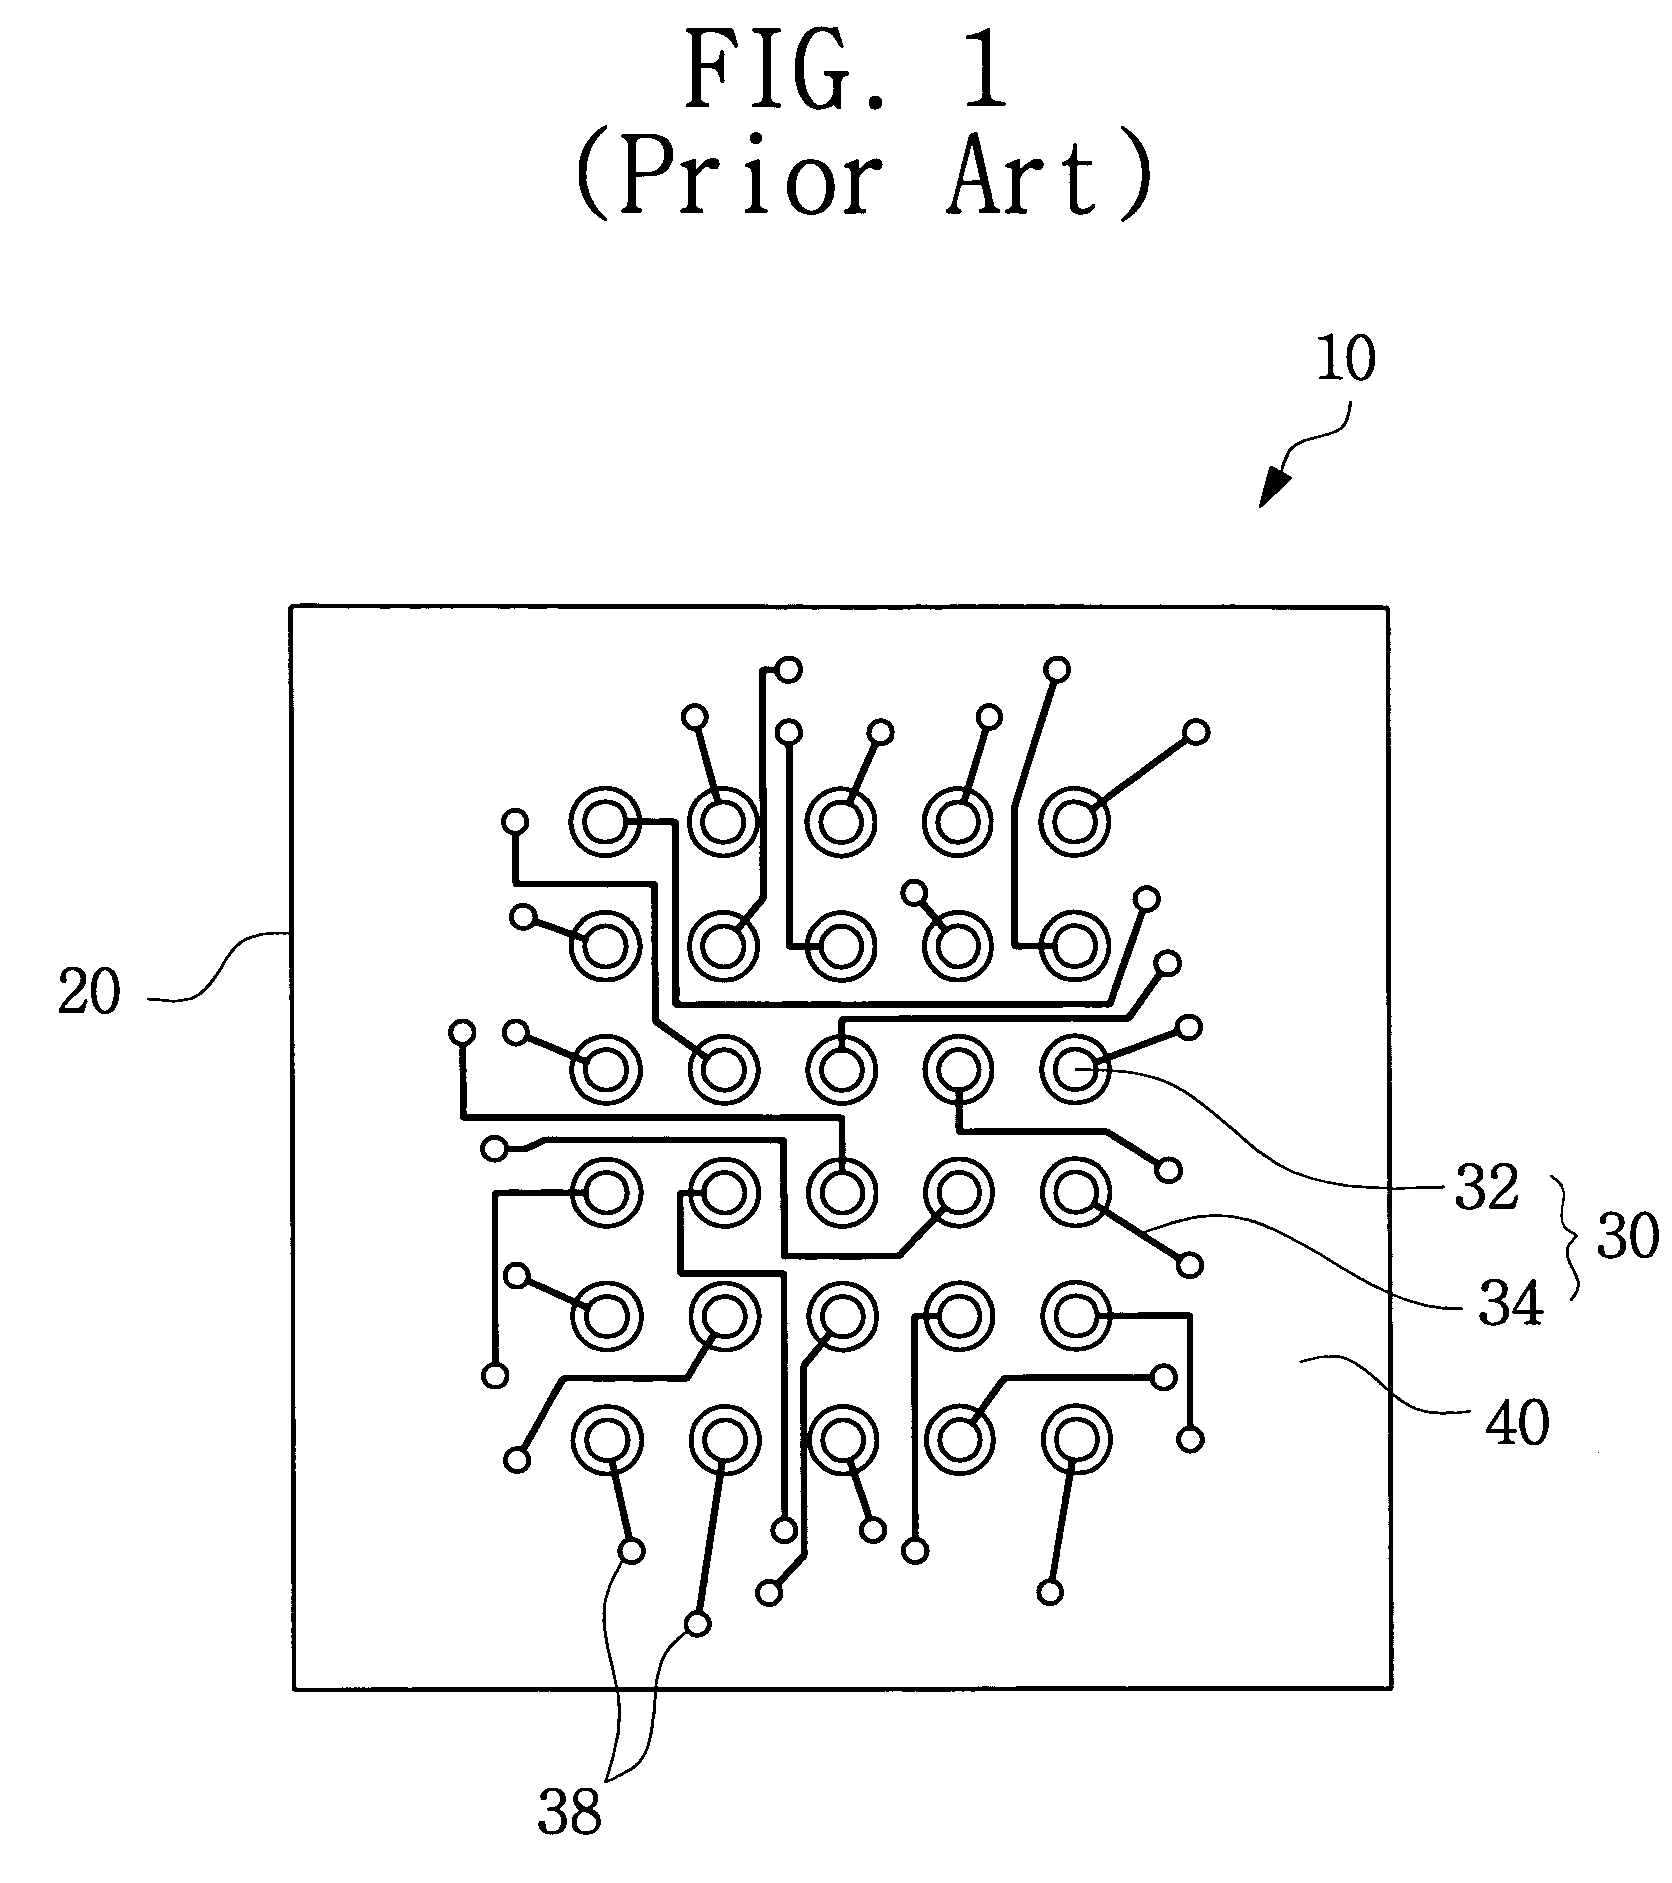 Non-solder mask defined (NSMD) type wiring substrate for ball grid array (BGA) package and method for manufacturing such a wiring substrate